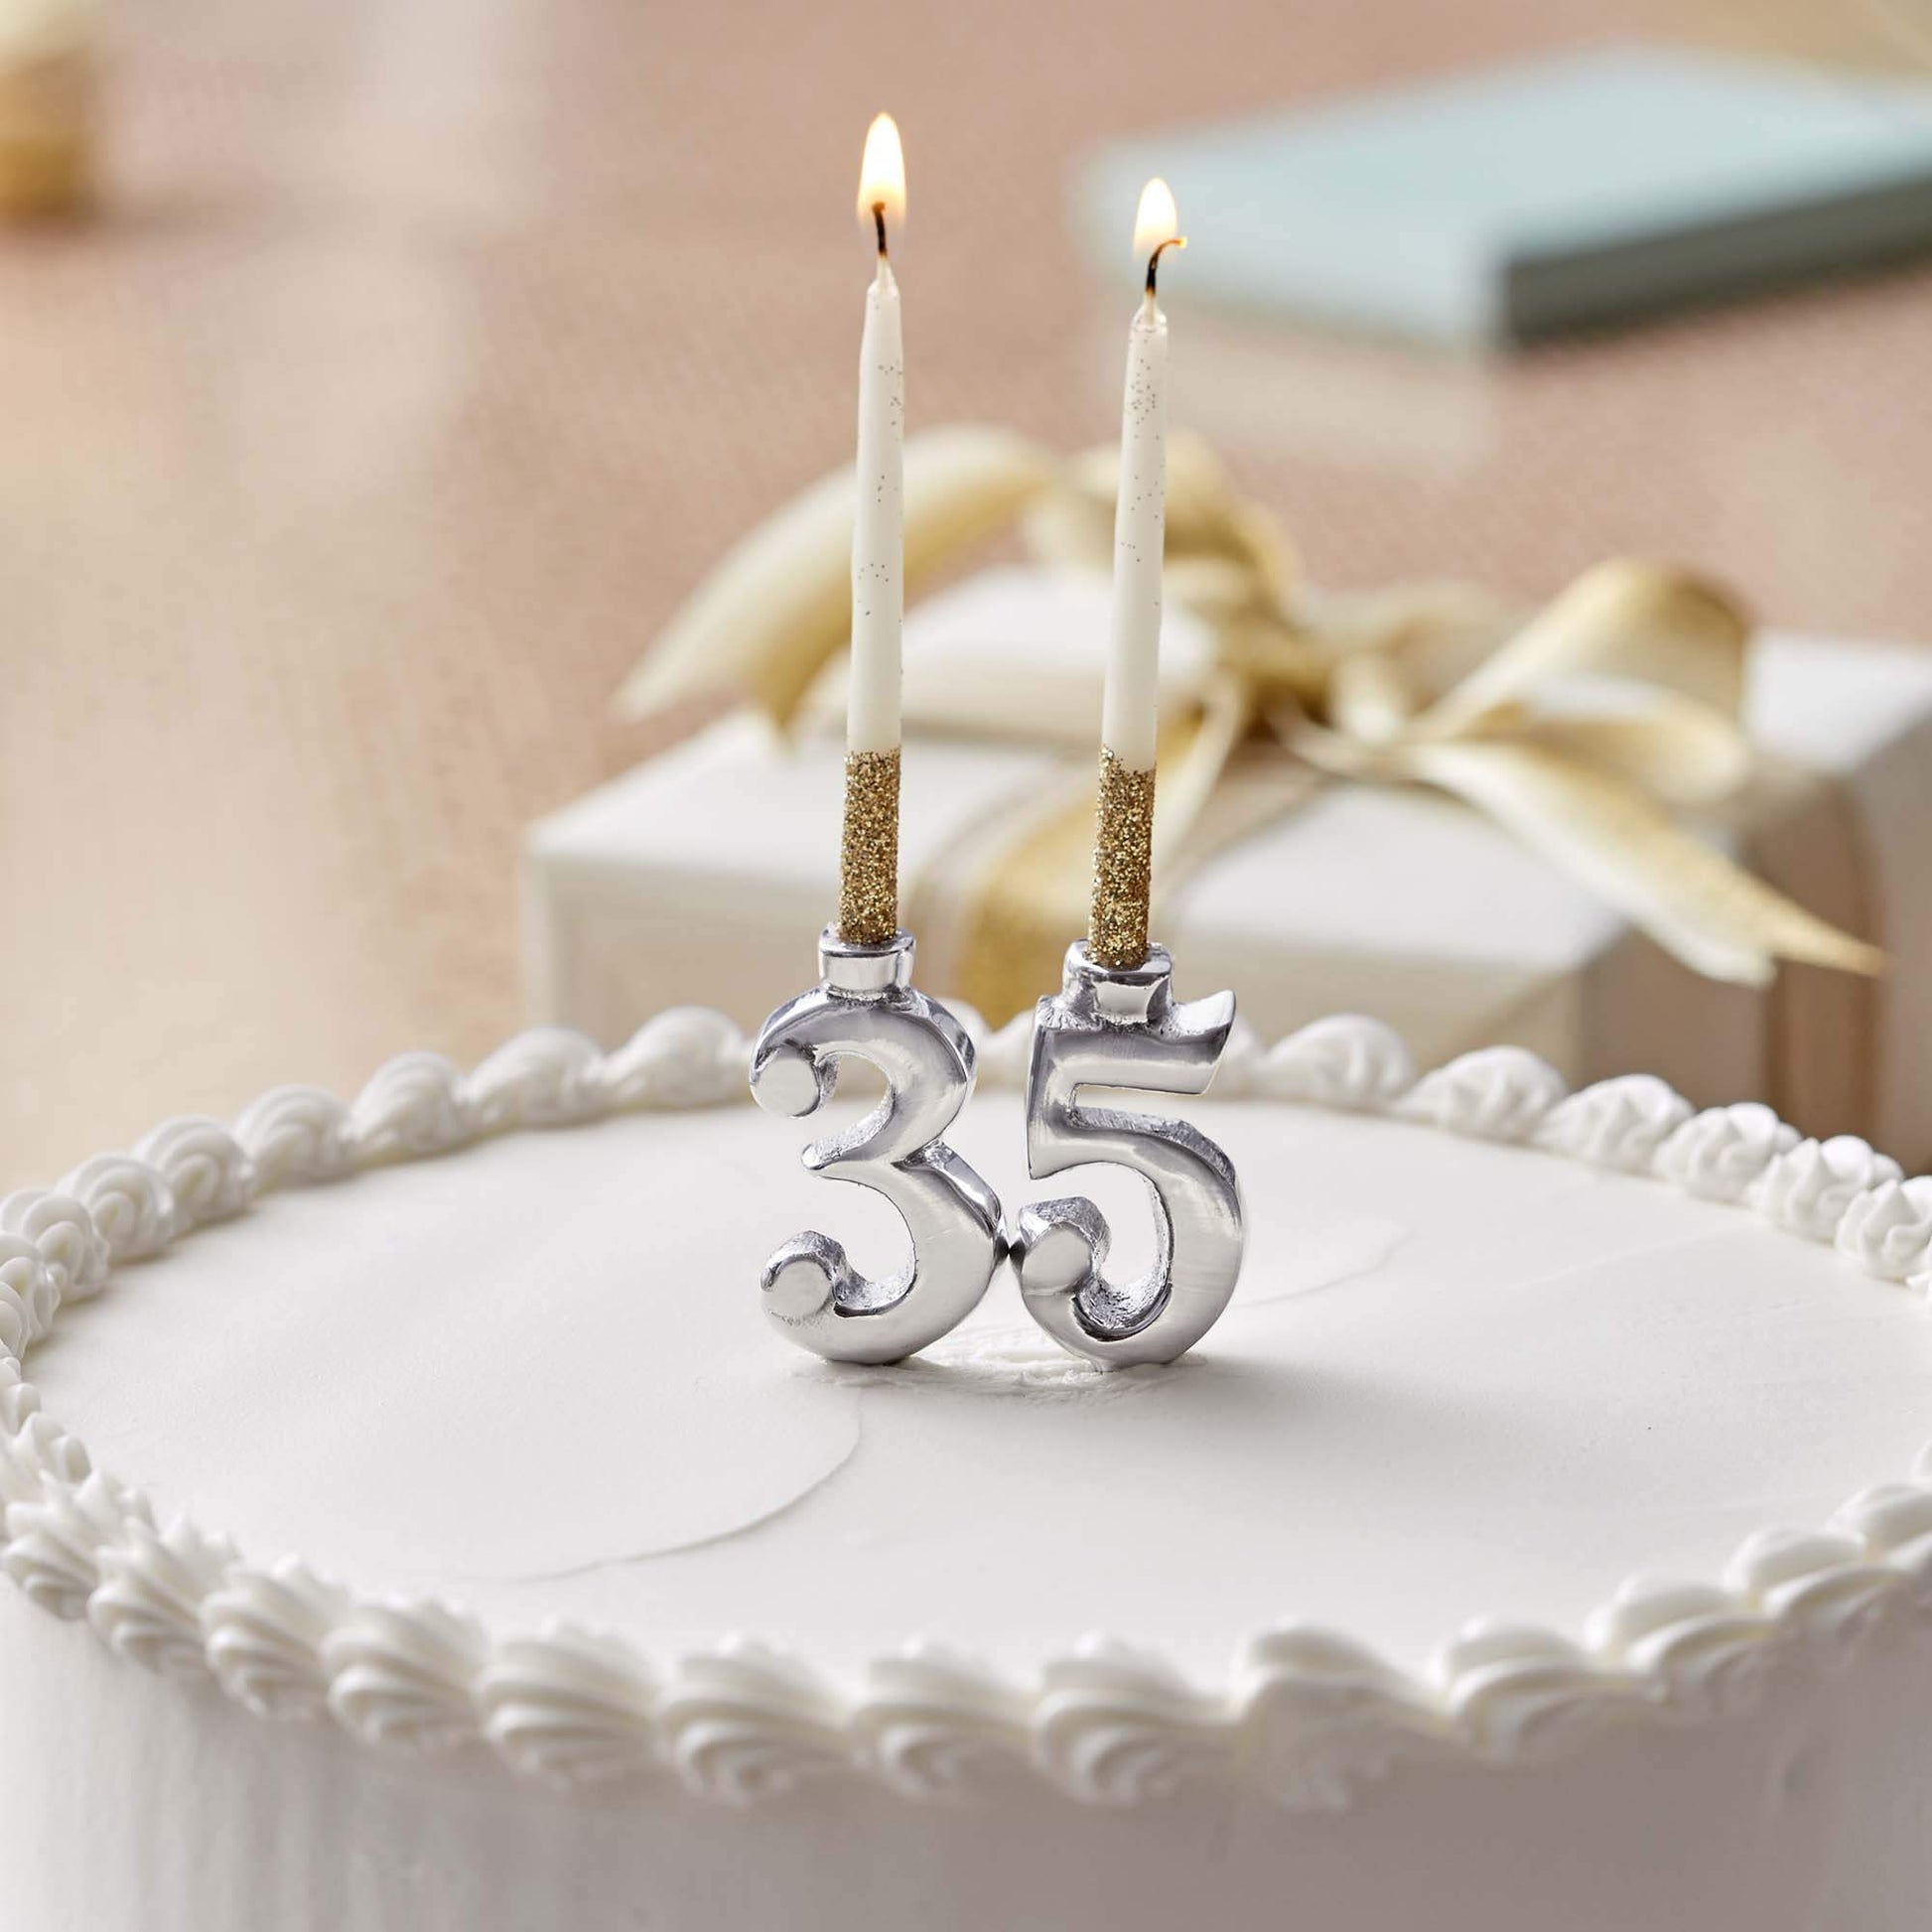 3 and 5 Silver Number Candle Holder Set (For Cake) 